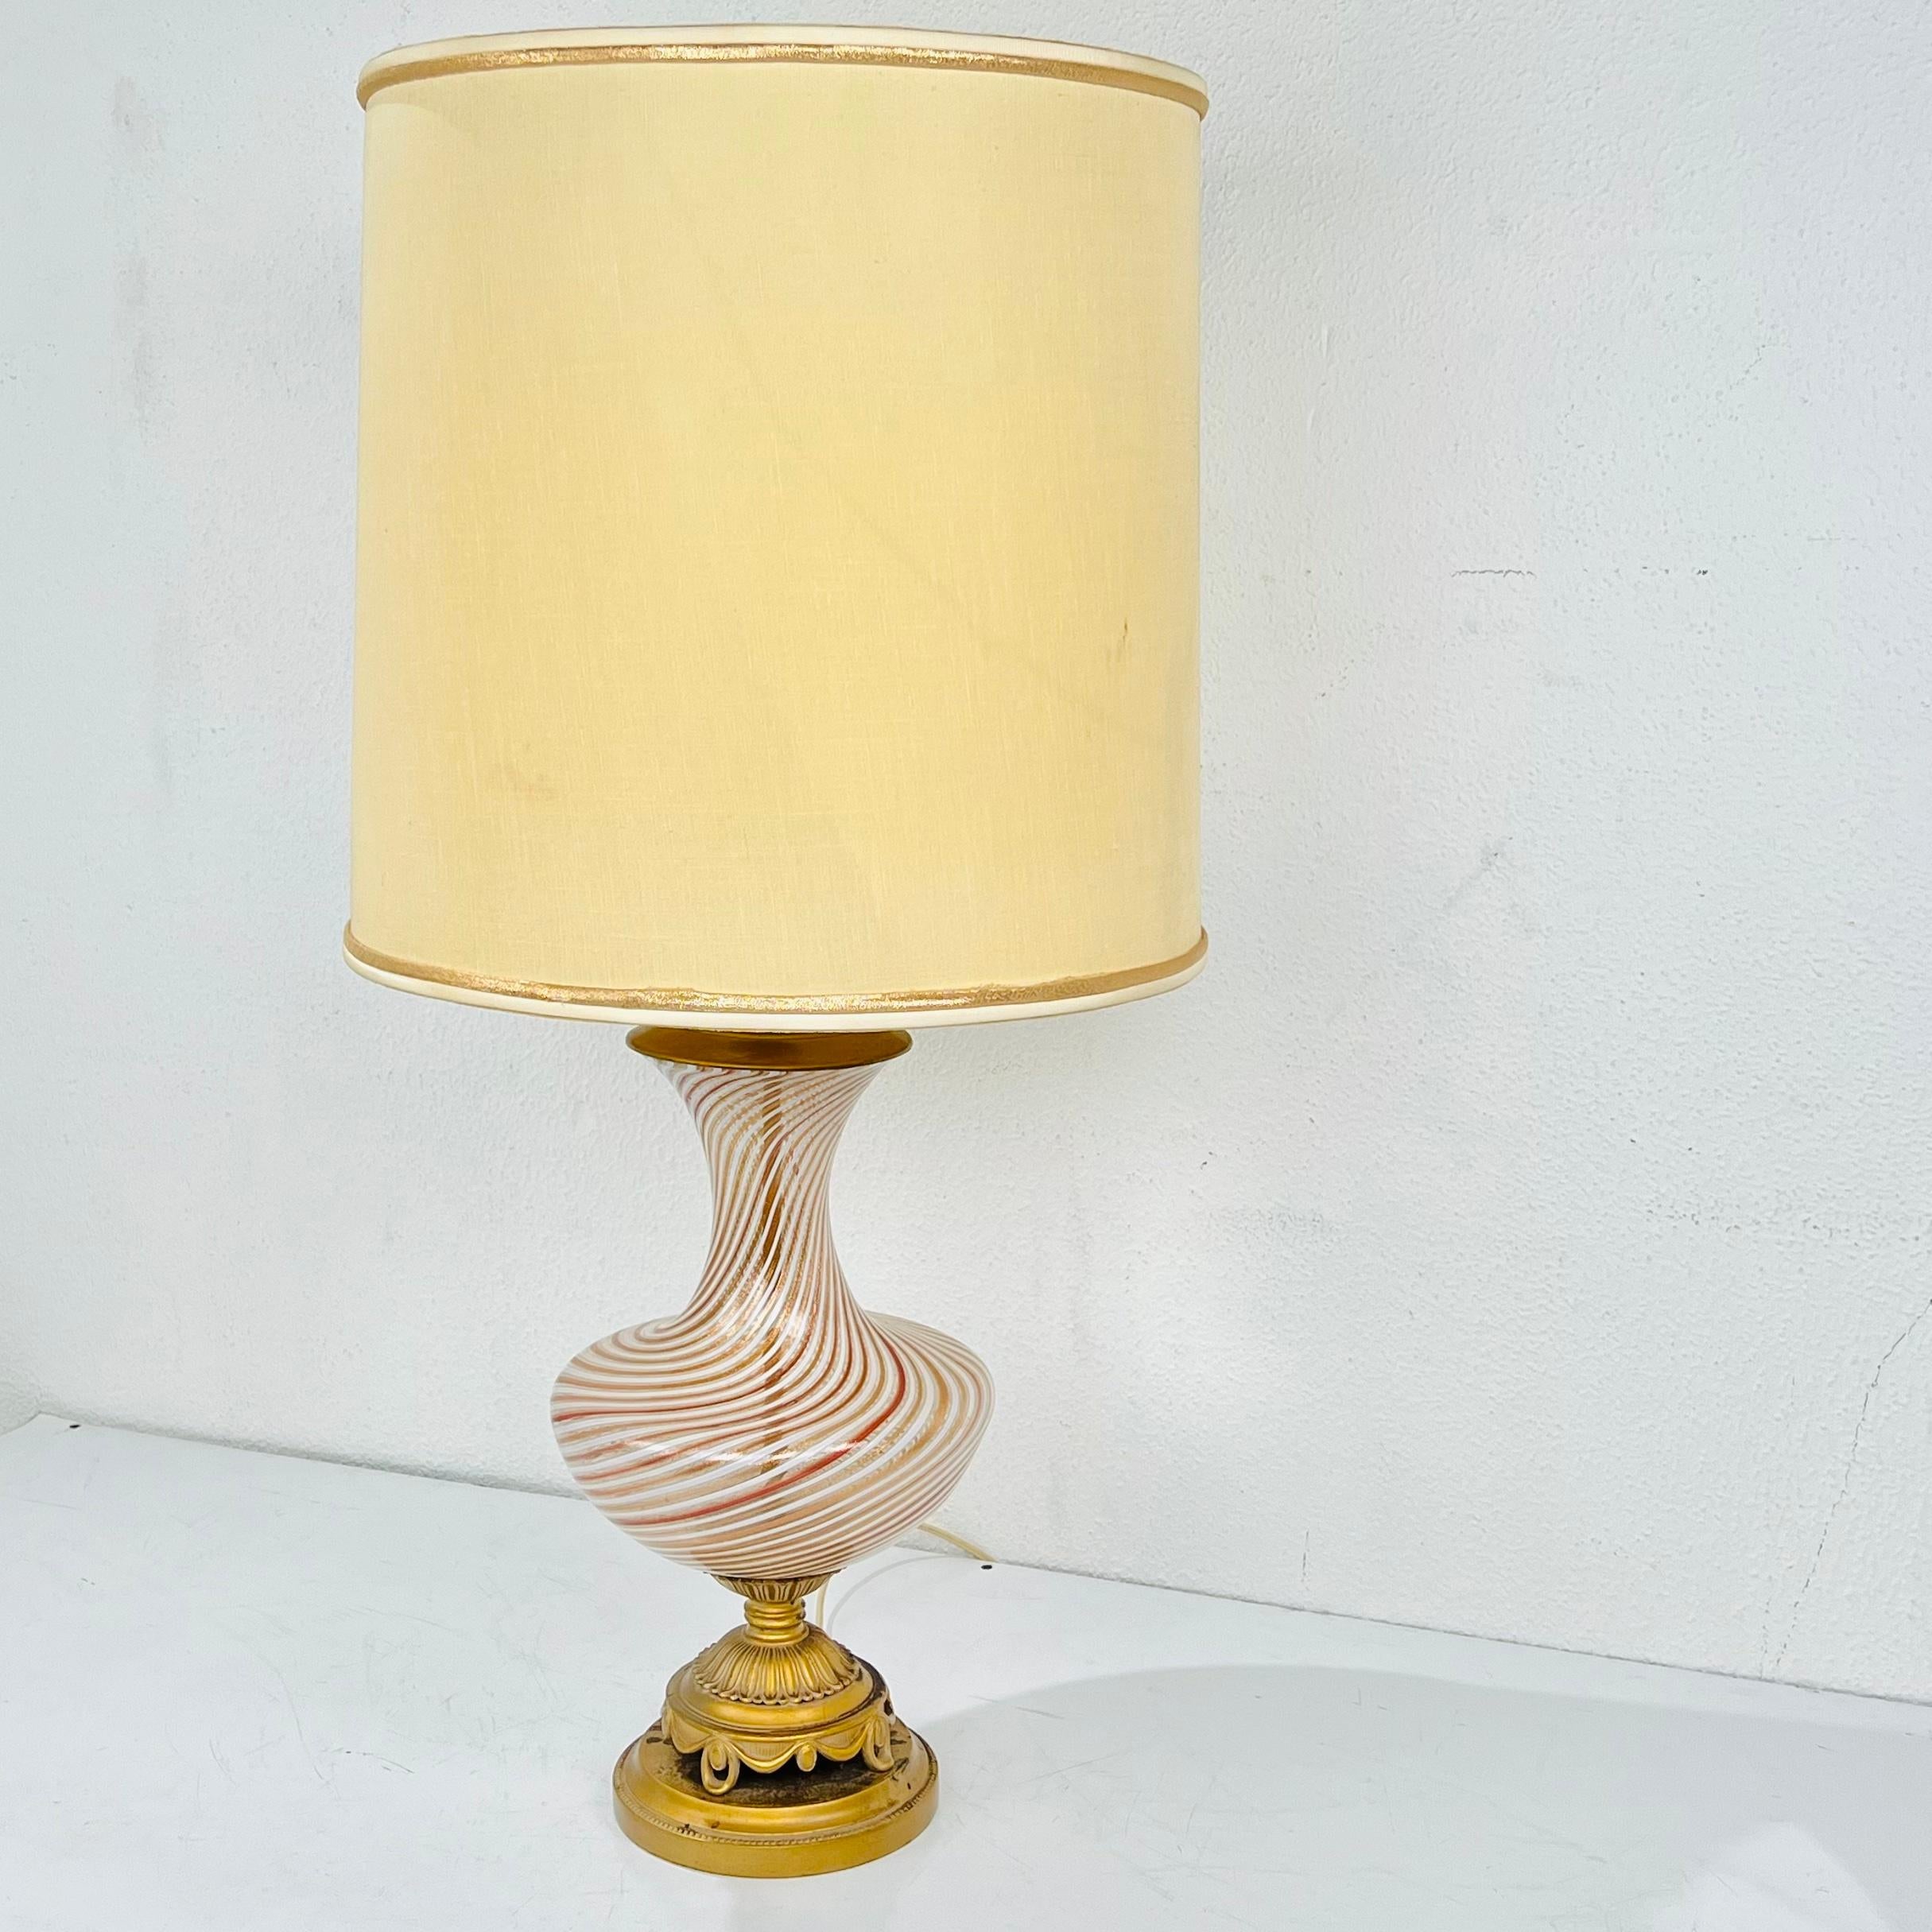 Antique Murano Glass Lamp by Dino Martens For Sale 8